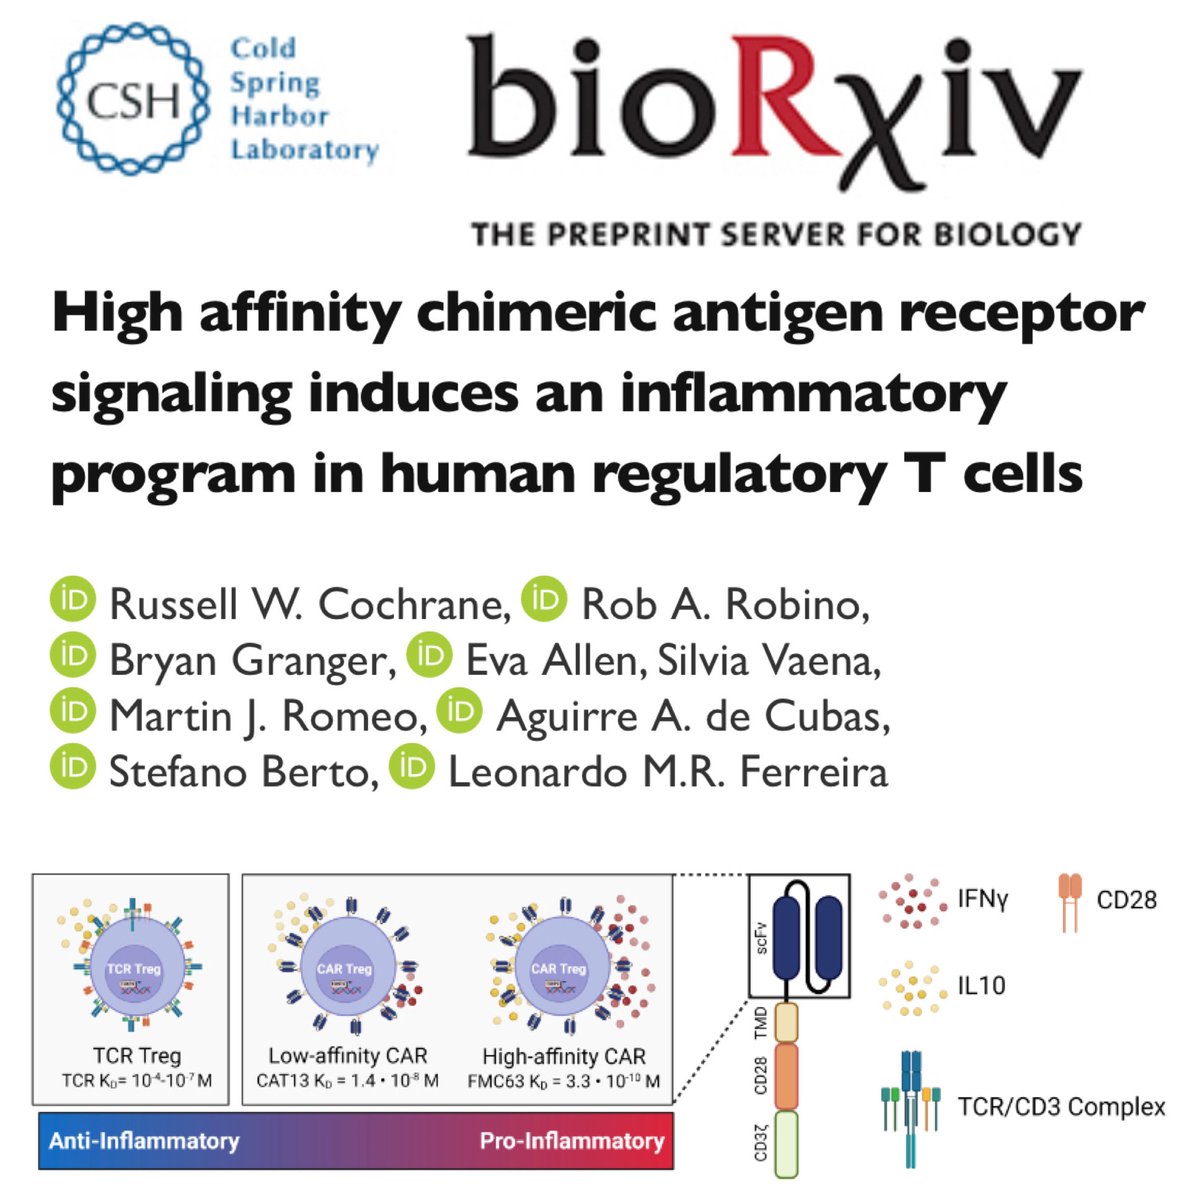 Our lab's first preprint @biorxivpreprint is out! We discovered that high affinity chimeric antigen receptor (CAR) signaling induces an #inflammatory program in #human regulatory T cells (Tregs)! 🧵 #immunologymatters #changingwhatspossible #CARTregs 🚗🦖 biorxiv.org/content/10.110…